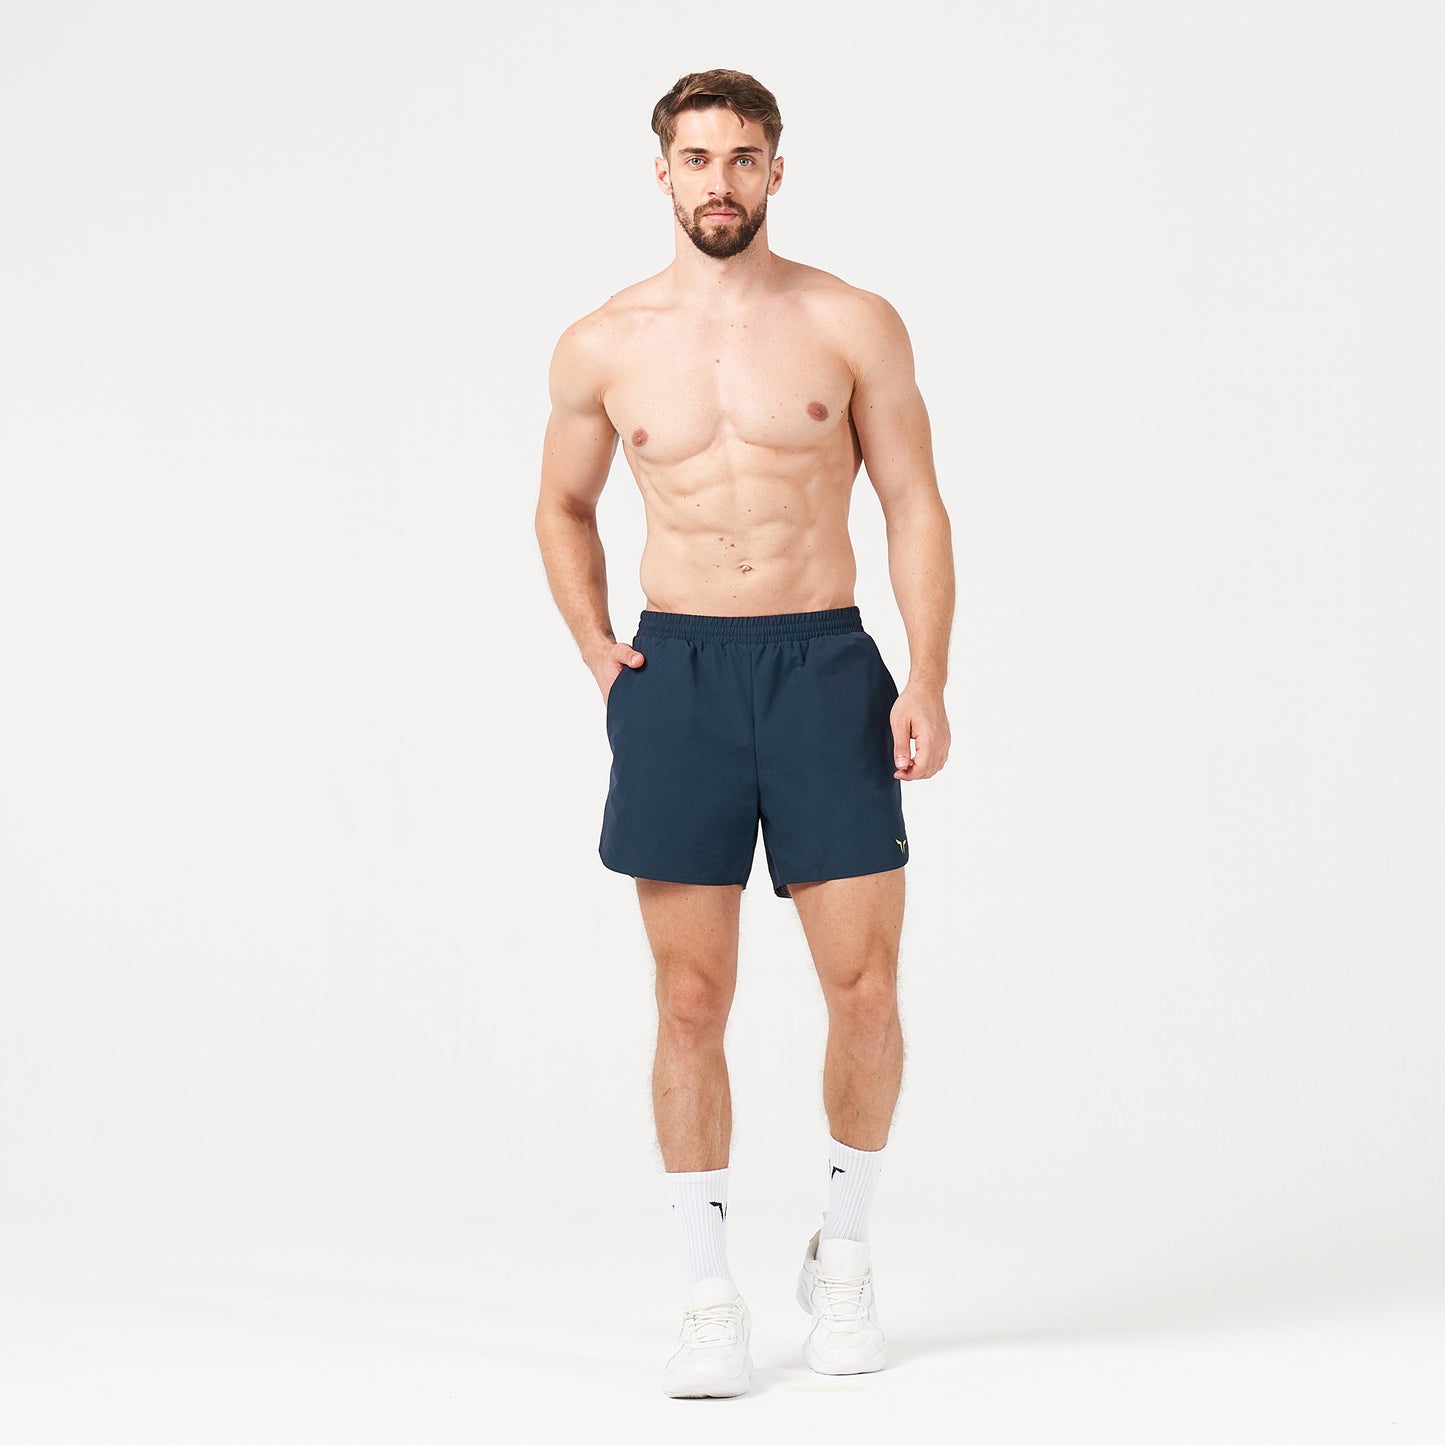 squatwolf-gym-wear-lab360-tdry-tech-2-in-1-shorts-navy-workout-short-for-men